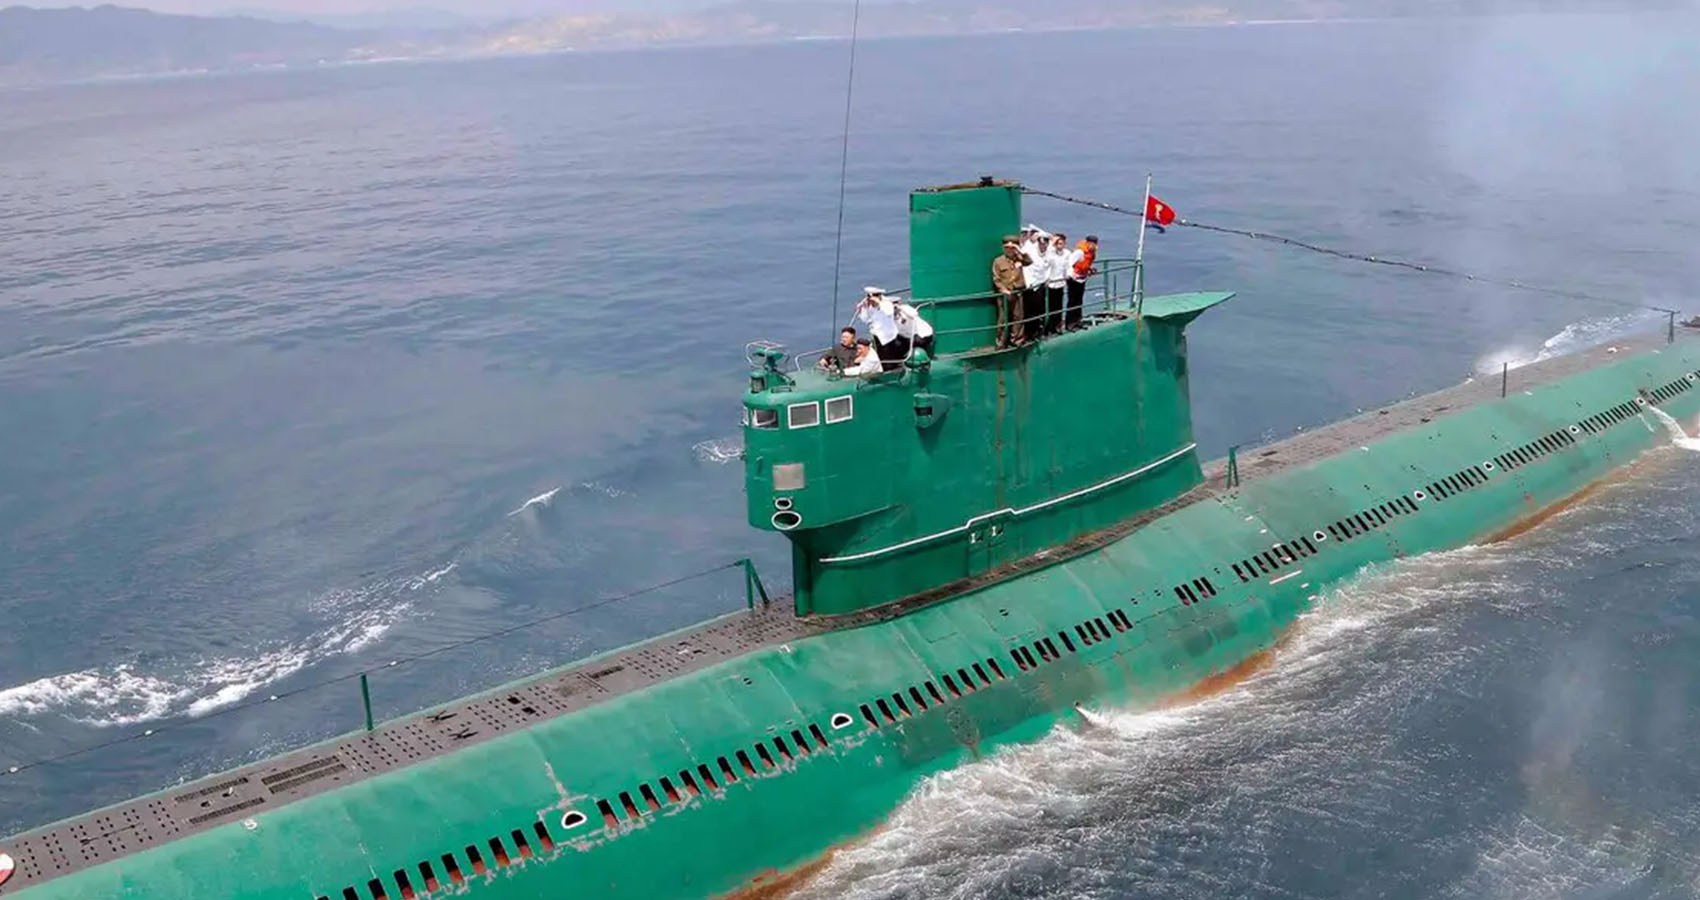 urban legends that turned out to be true - north korea submarine